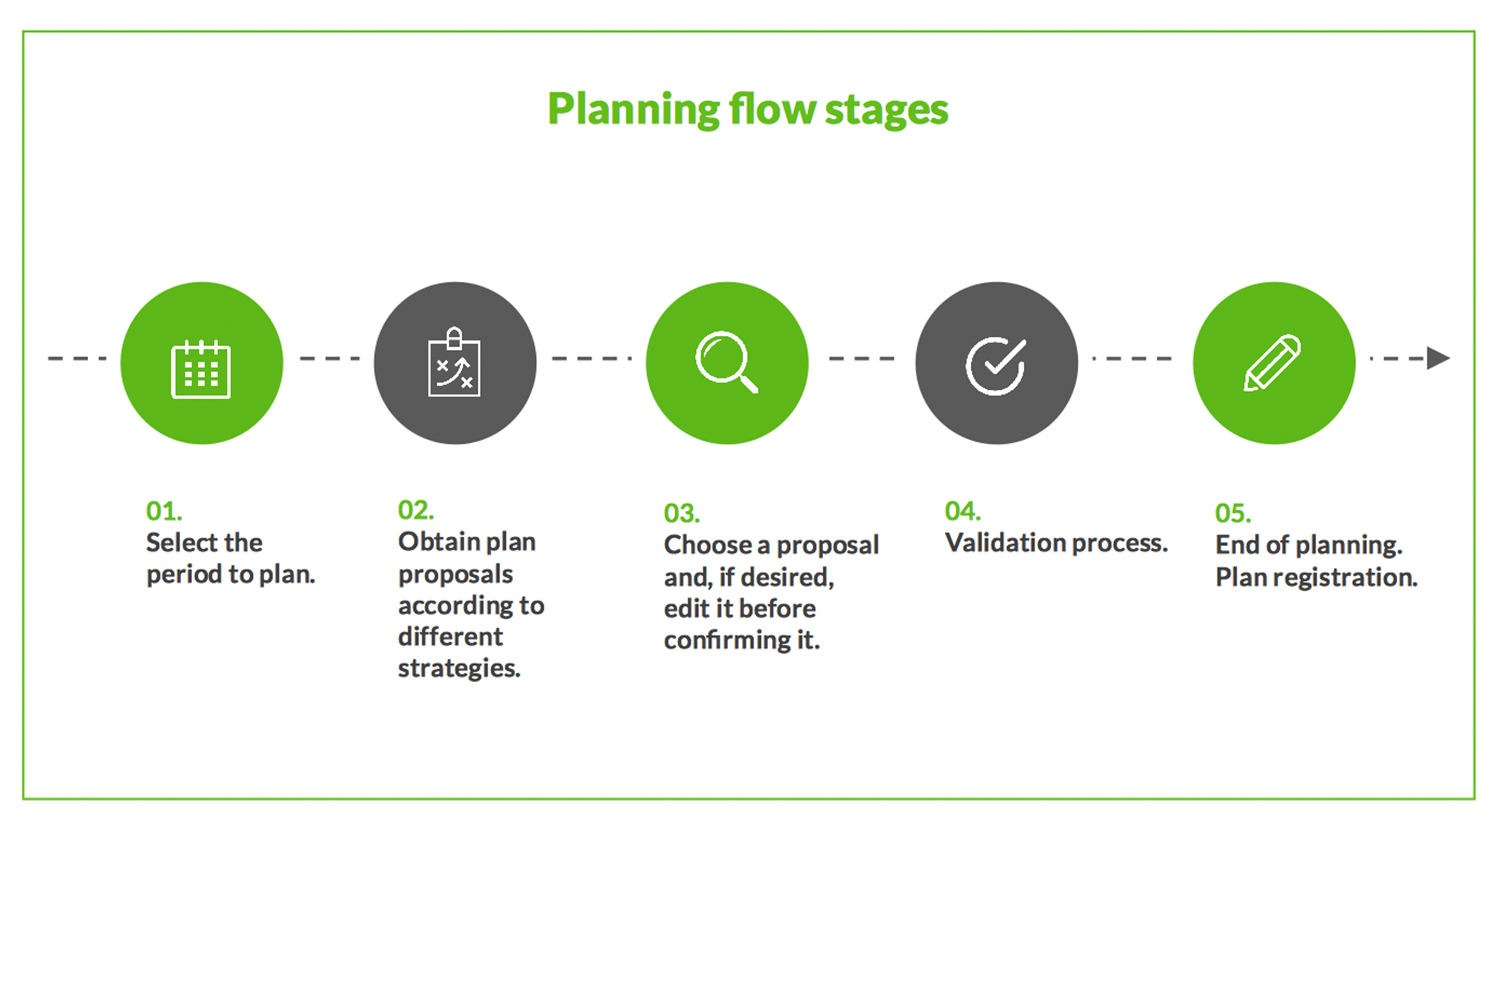 Planning flow stages